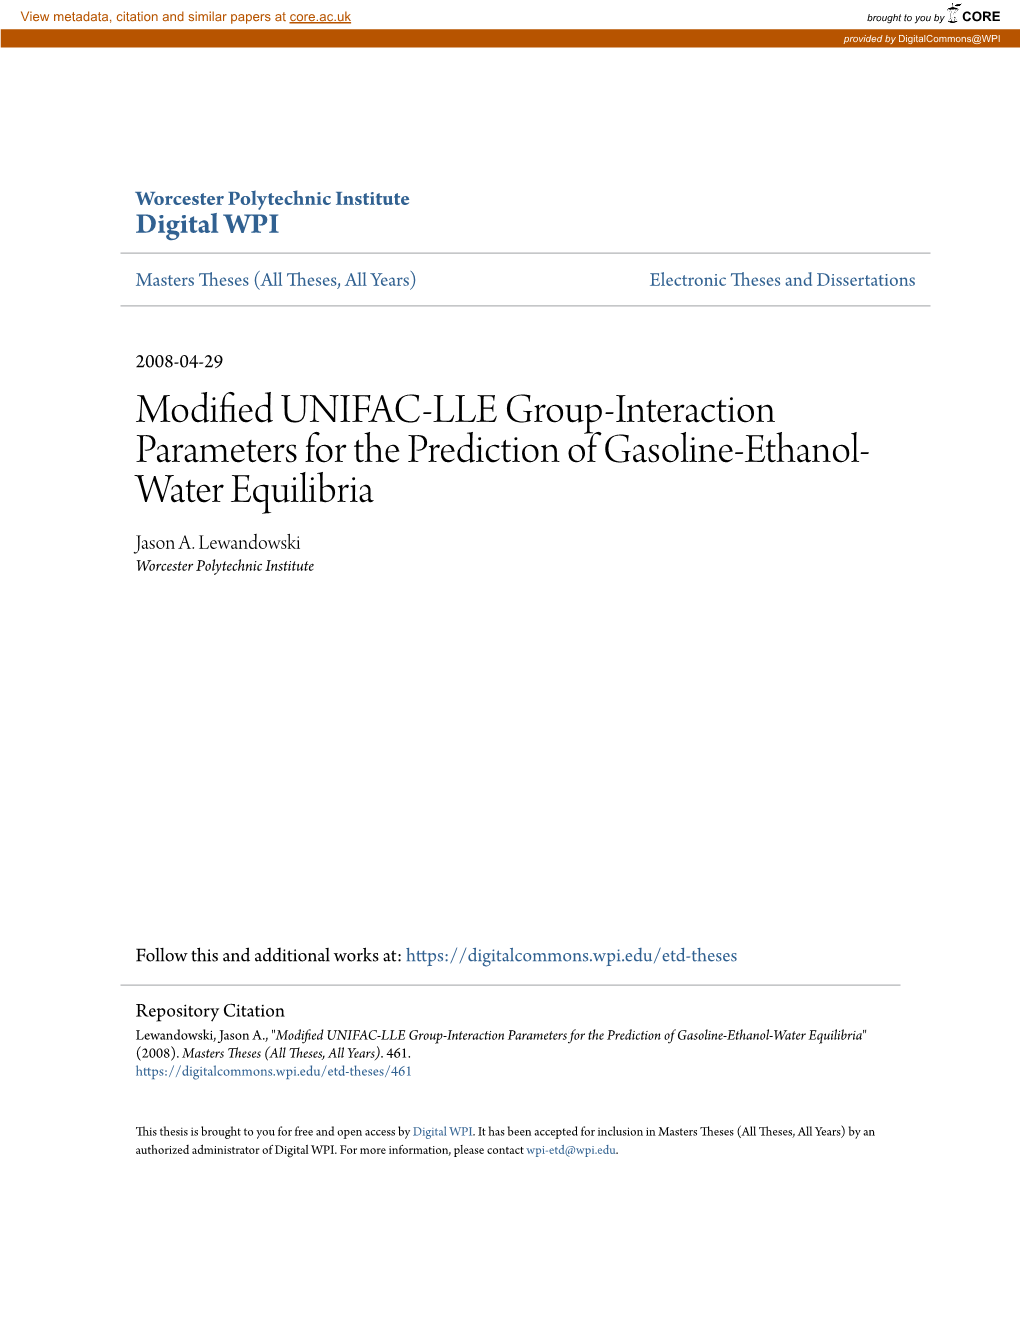 Modified UNIFAC-LLE Group-Interaction Parameters for the Prediction of Gasoline-Ethanol- Water Equilibria Jason A